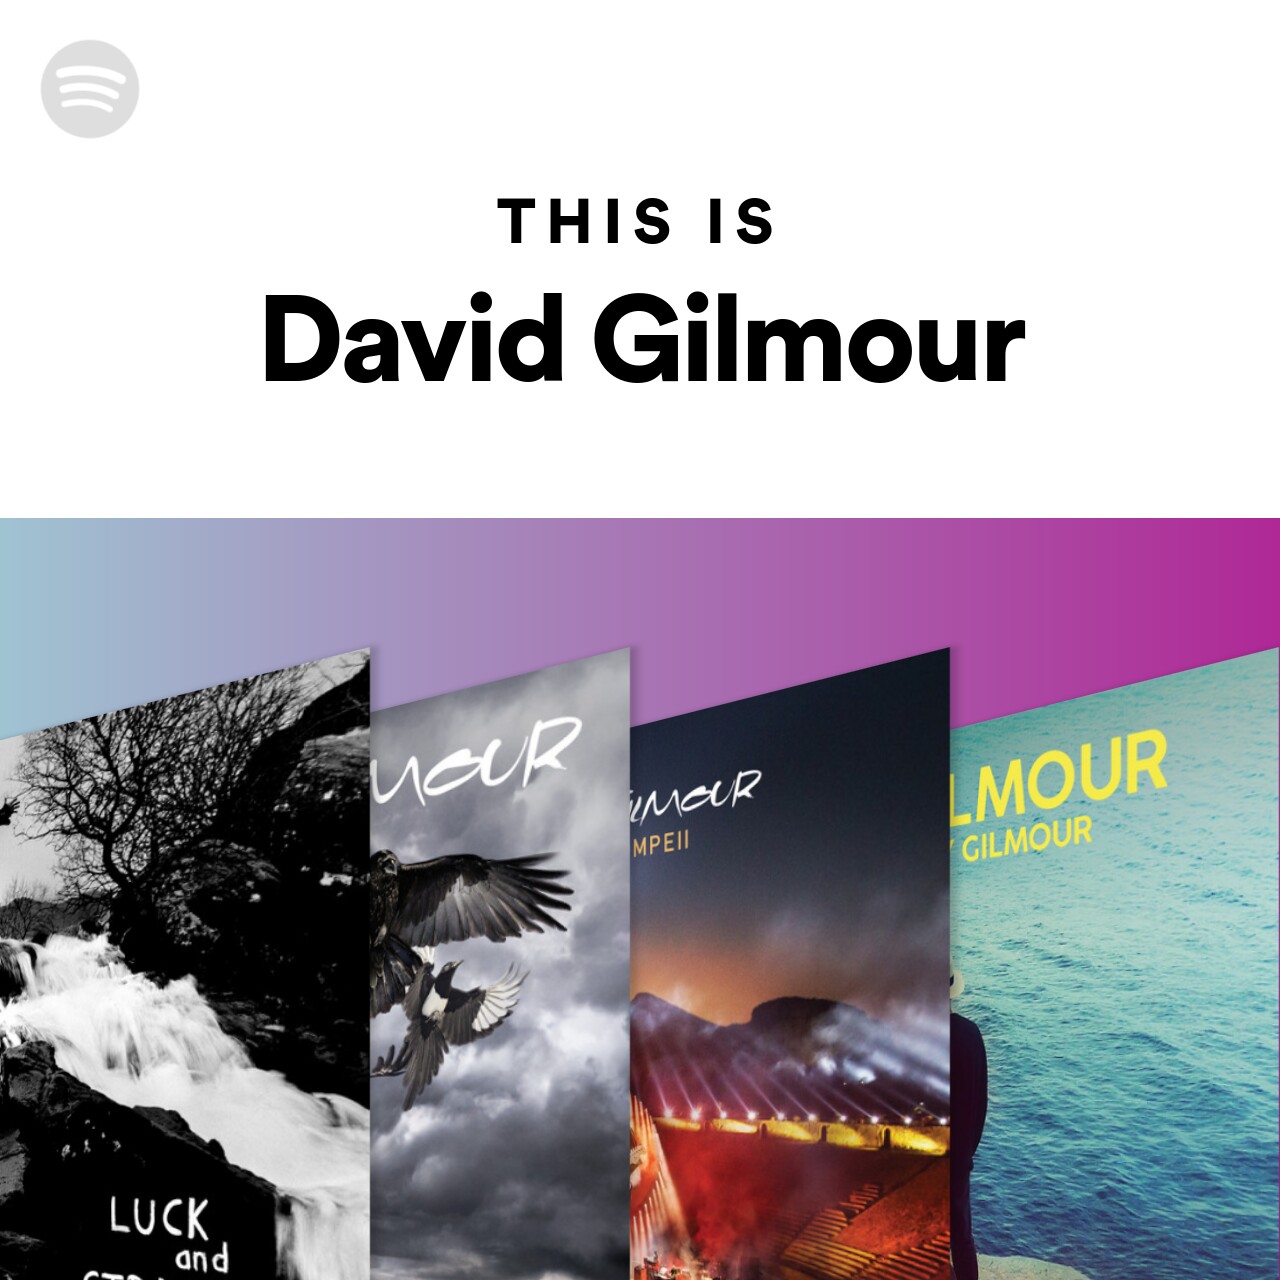 This is David Gilmour